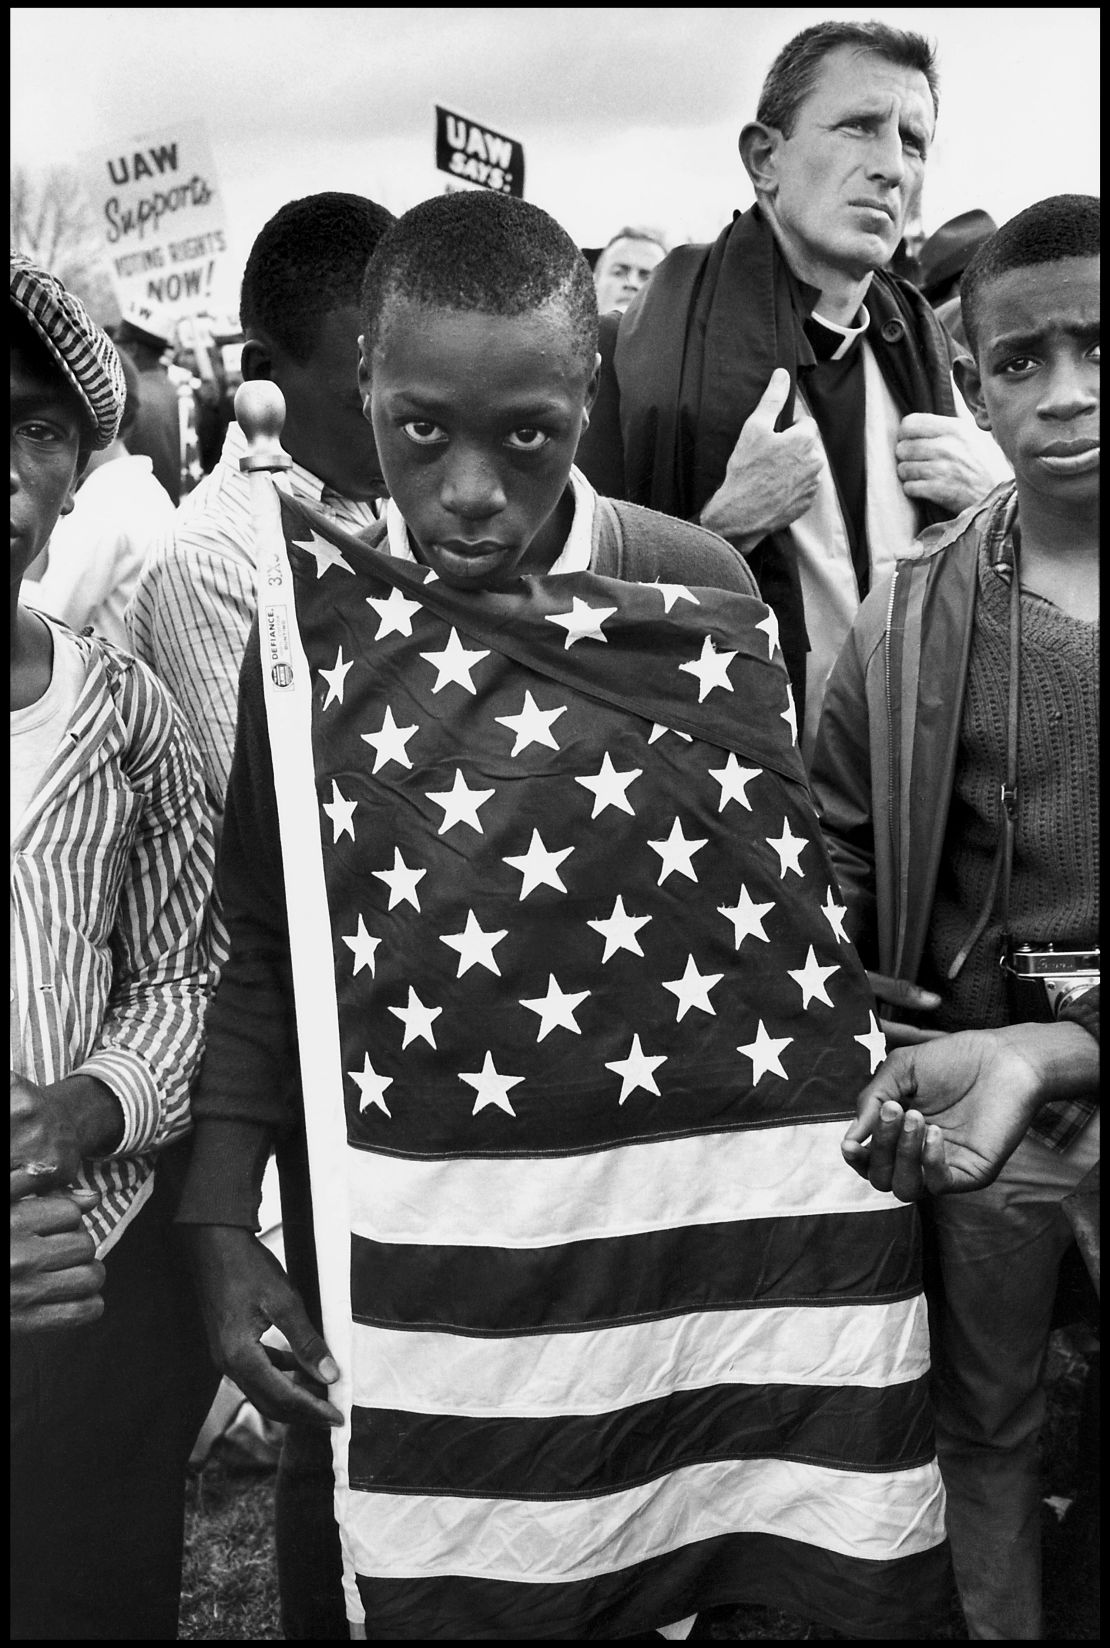 The Selma March, Alabama, 1965. "The direct gaze of this young man, his defiance and his ownership of that flag are so powerful," said curator Sophie Wright.